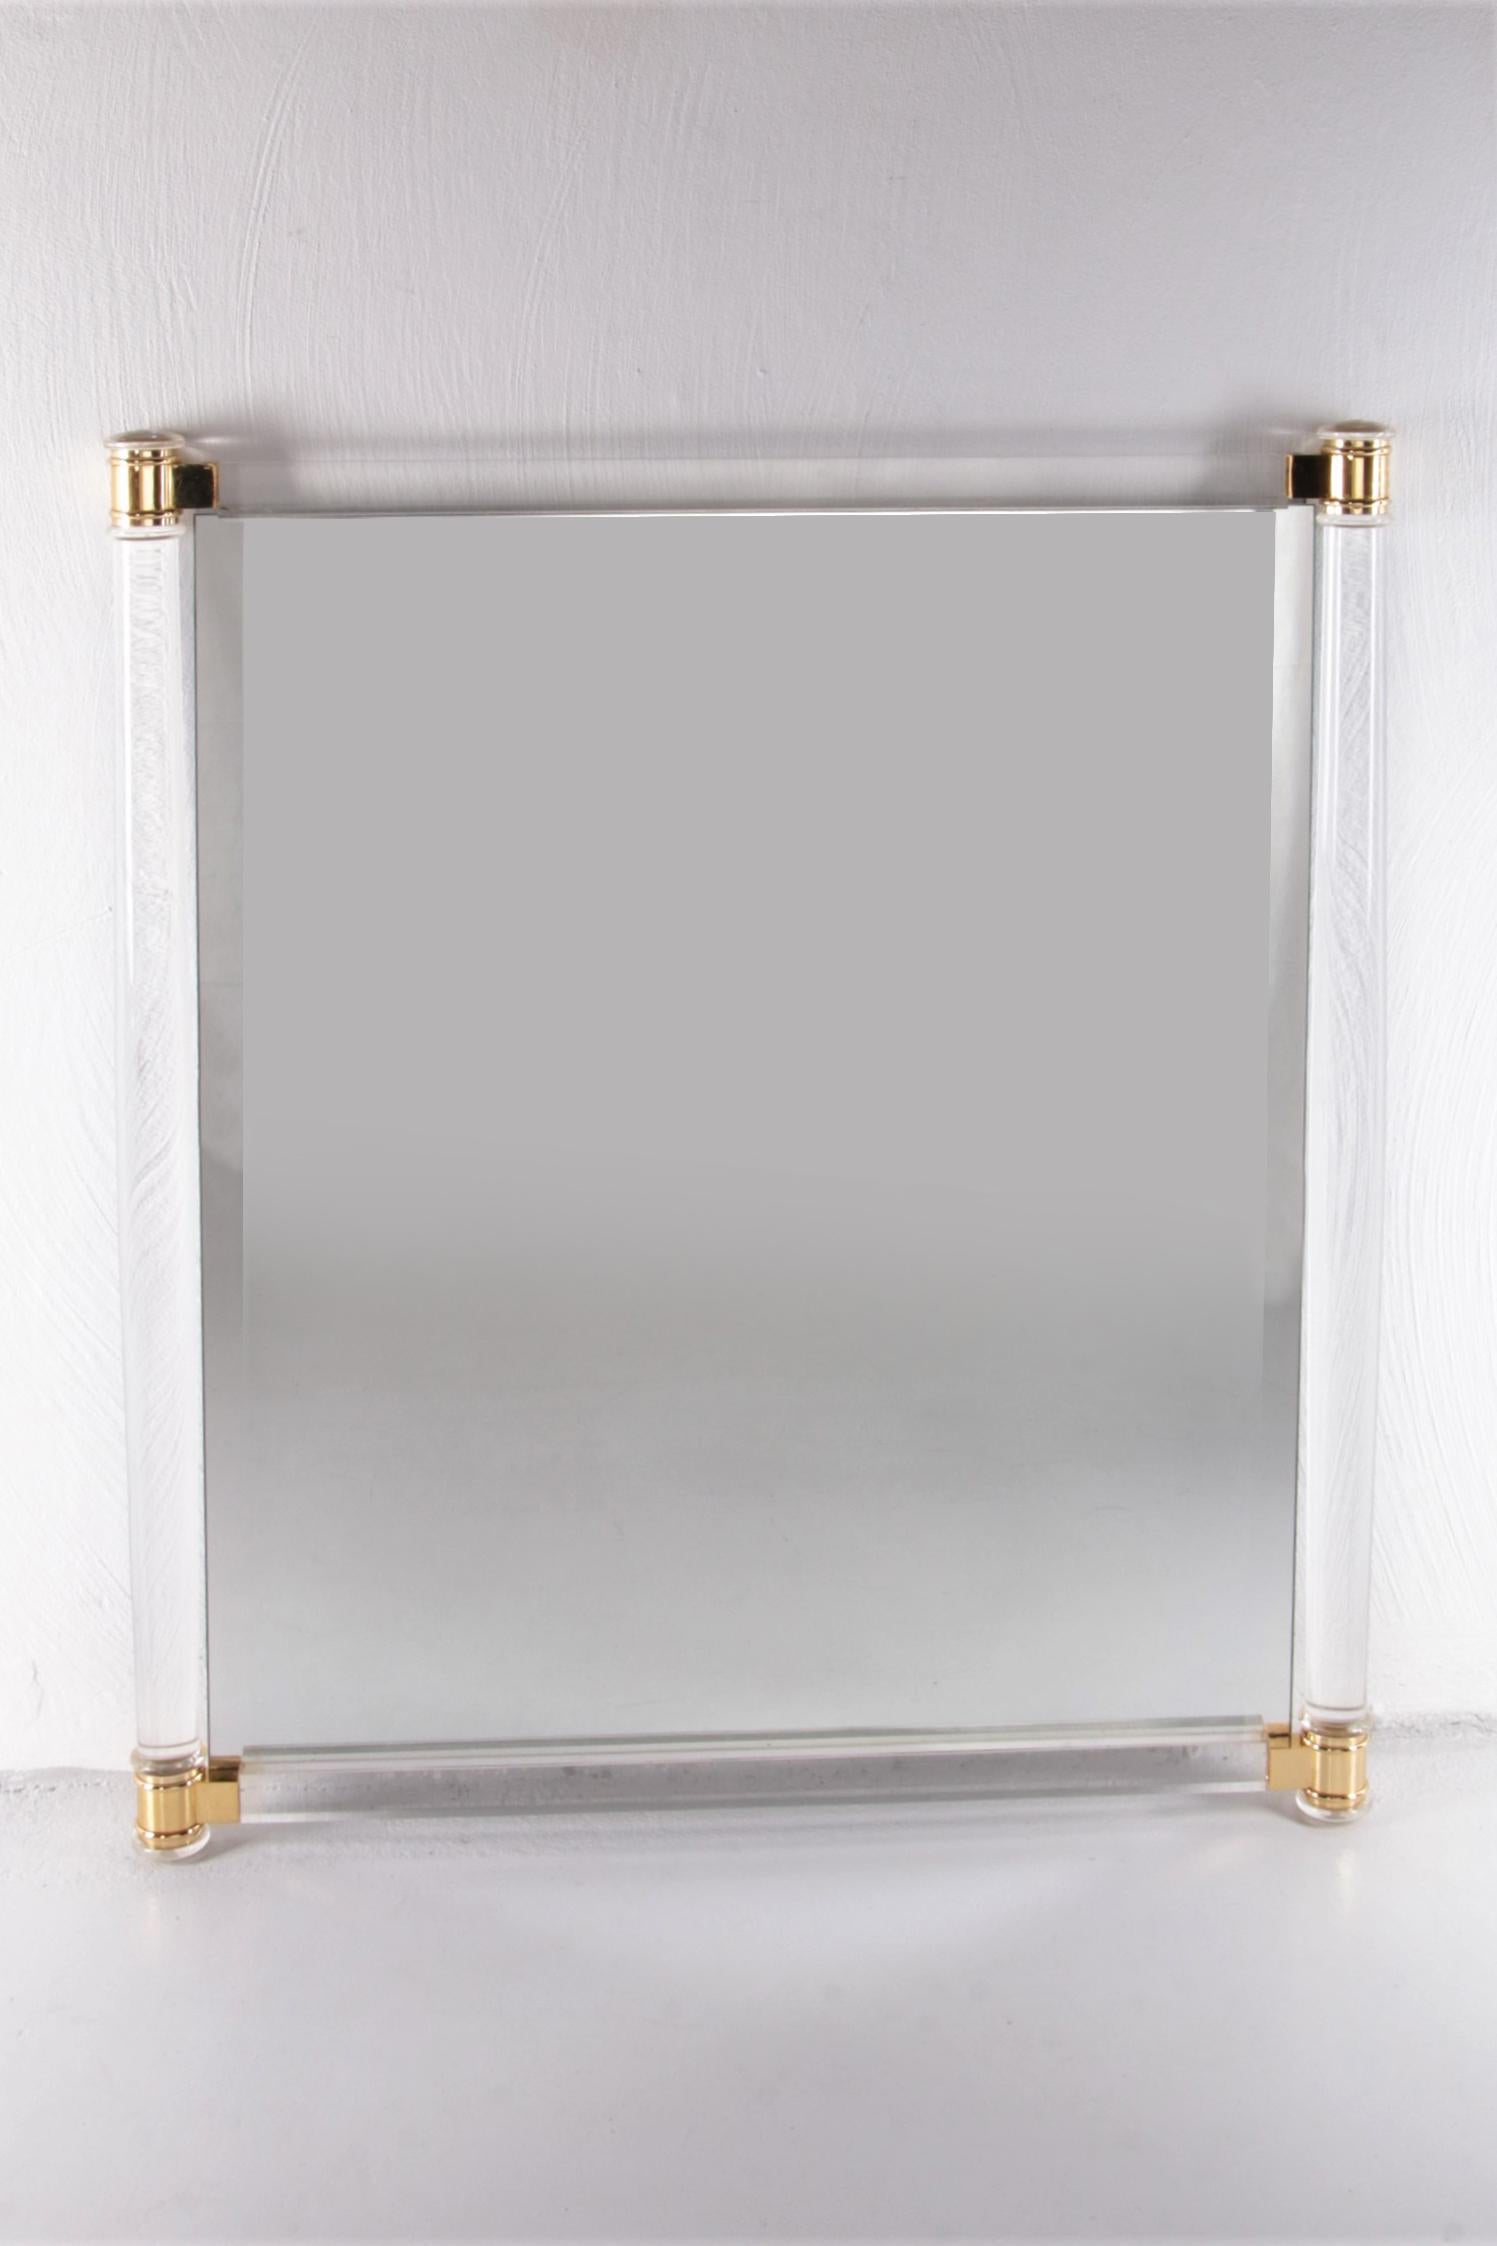 Large Charles Hollis Jones Plexiglass wall mirror, 1970 USA

This is a large wall mirror with a beautiful round Plexiglas edge with brass details.

This mirror is easy to hang because there are 2 mounting brackets on the back.

The mirror is a